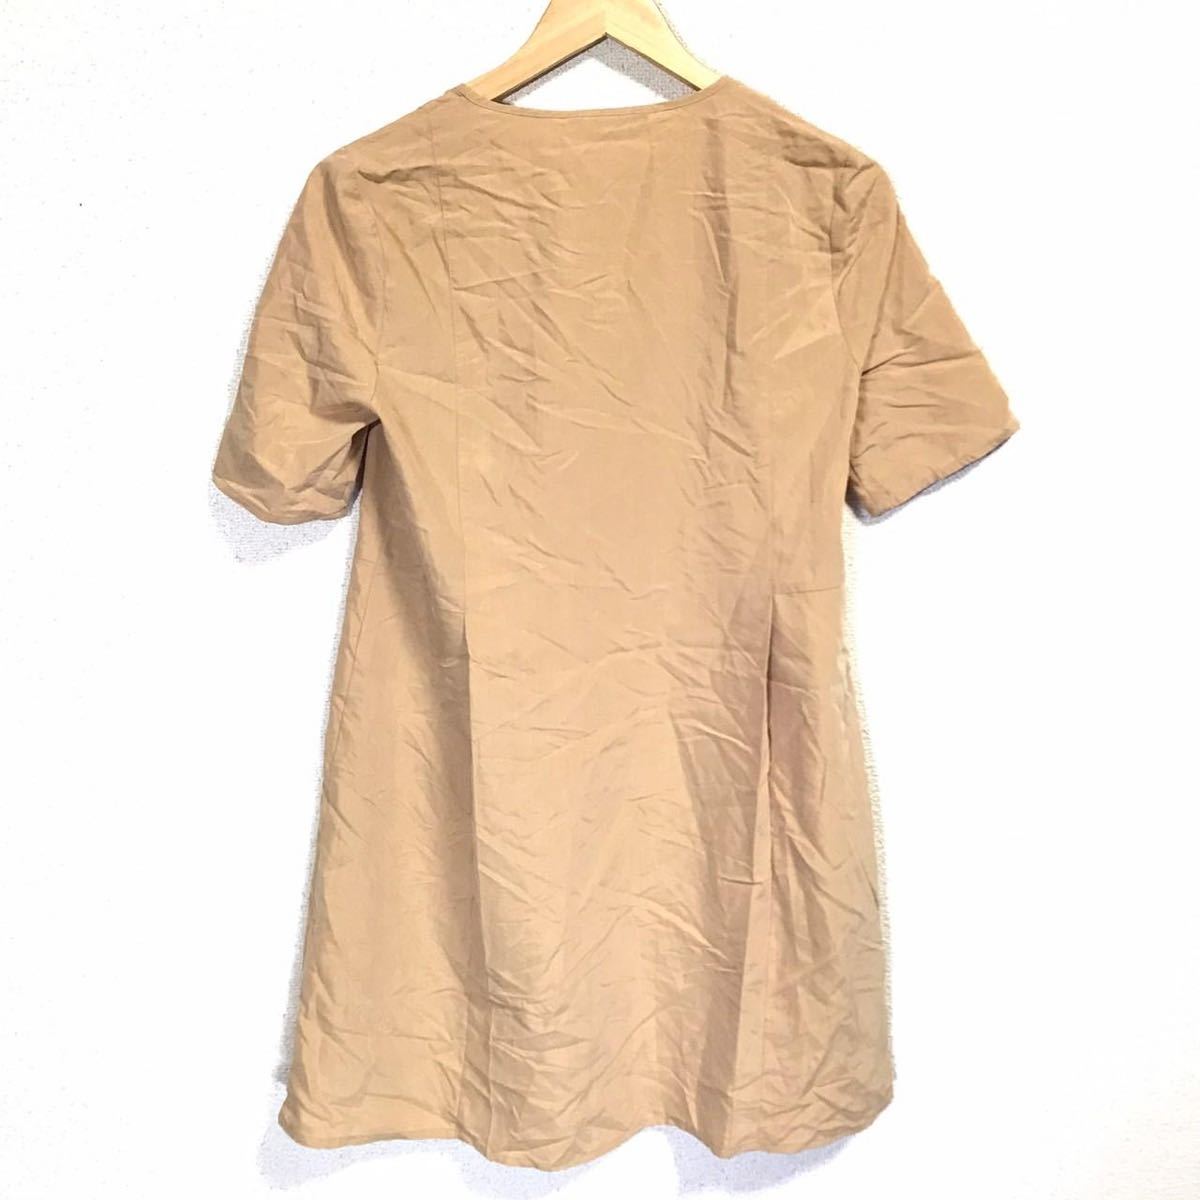 F4933db BCBGeneration( Be si- Be generation ) tag equipped short sleeves One-piece XXS size beige lady's tunic 